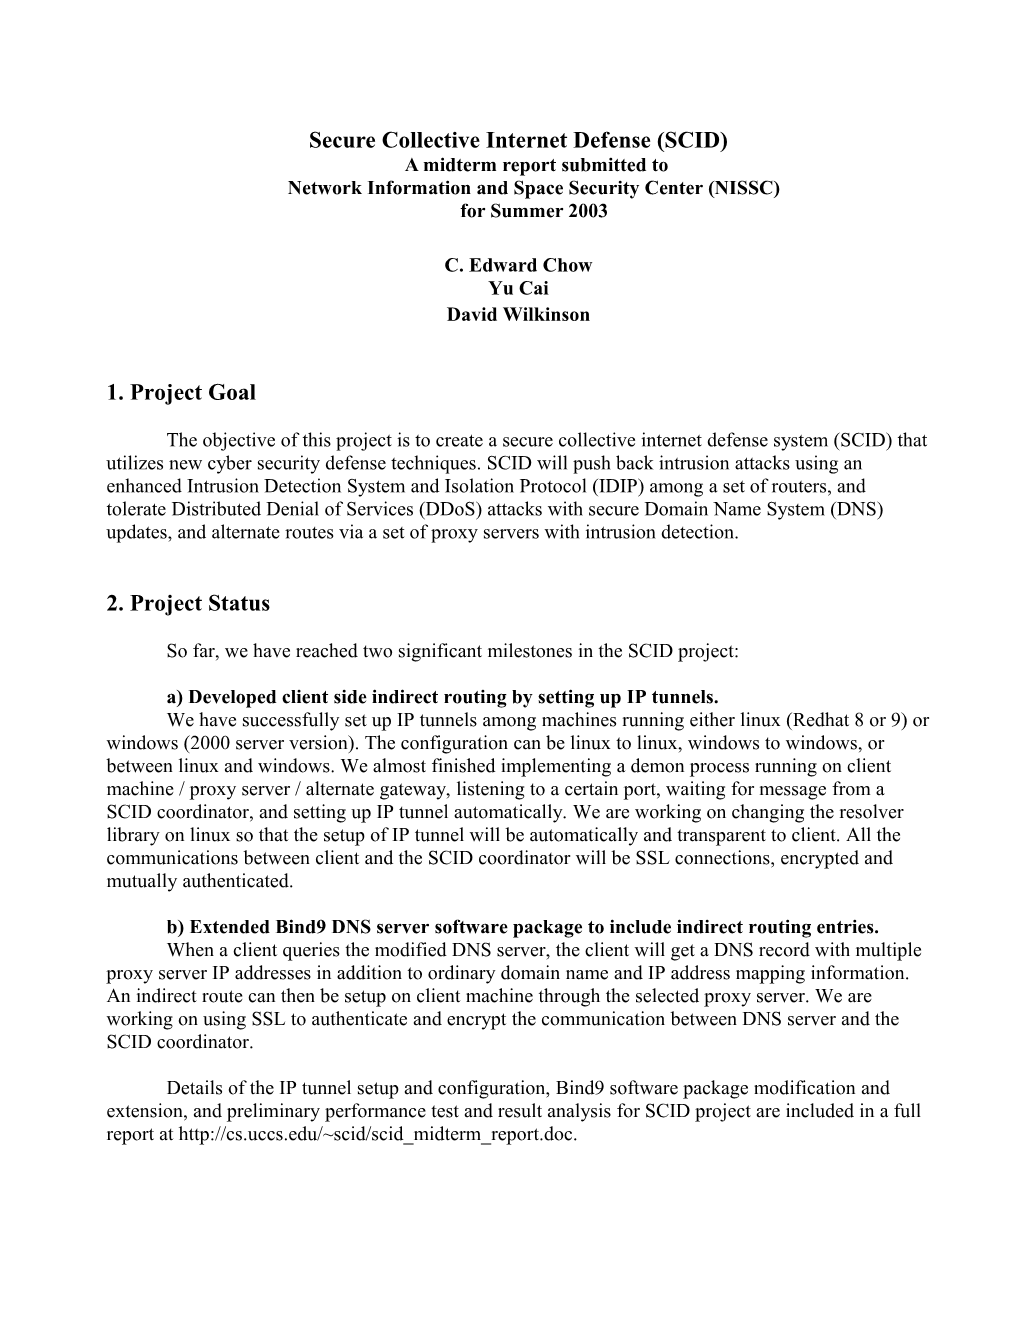 Secure Collective Internet Defense (SCID)A Midterm Report Submitted Tonetwork Information